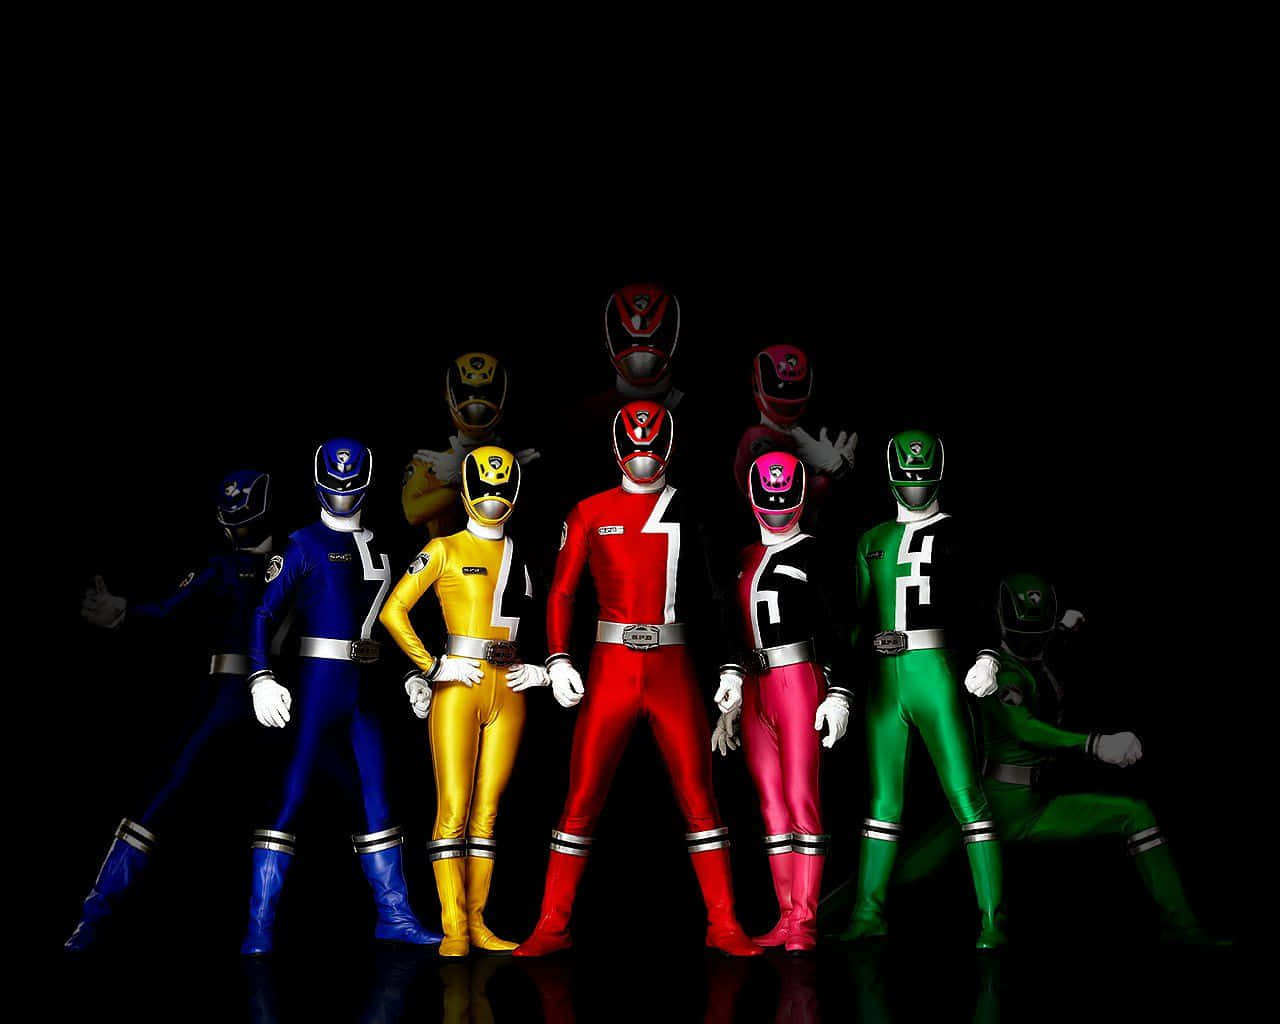 The Mighty Power Rangers Ready for Action